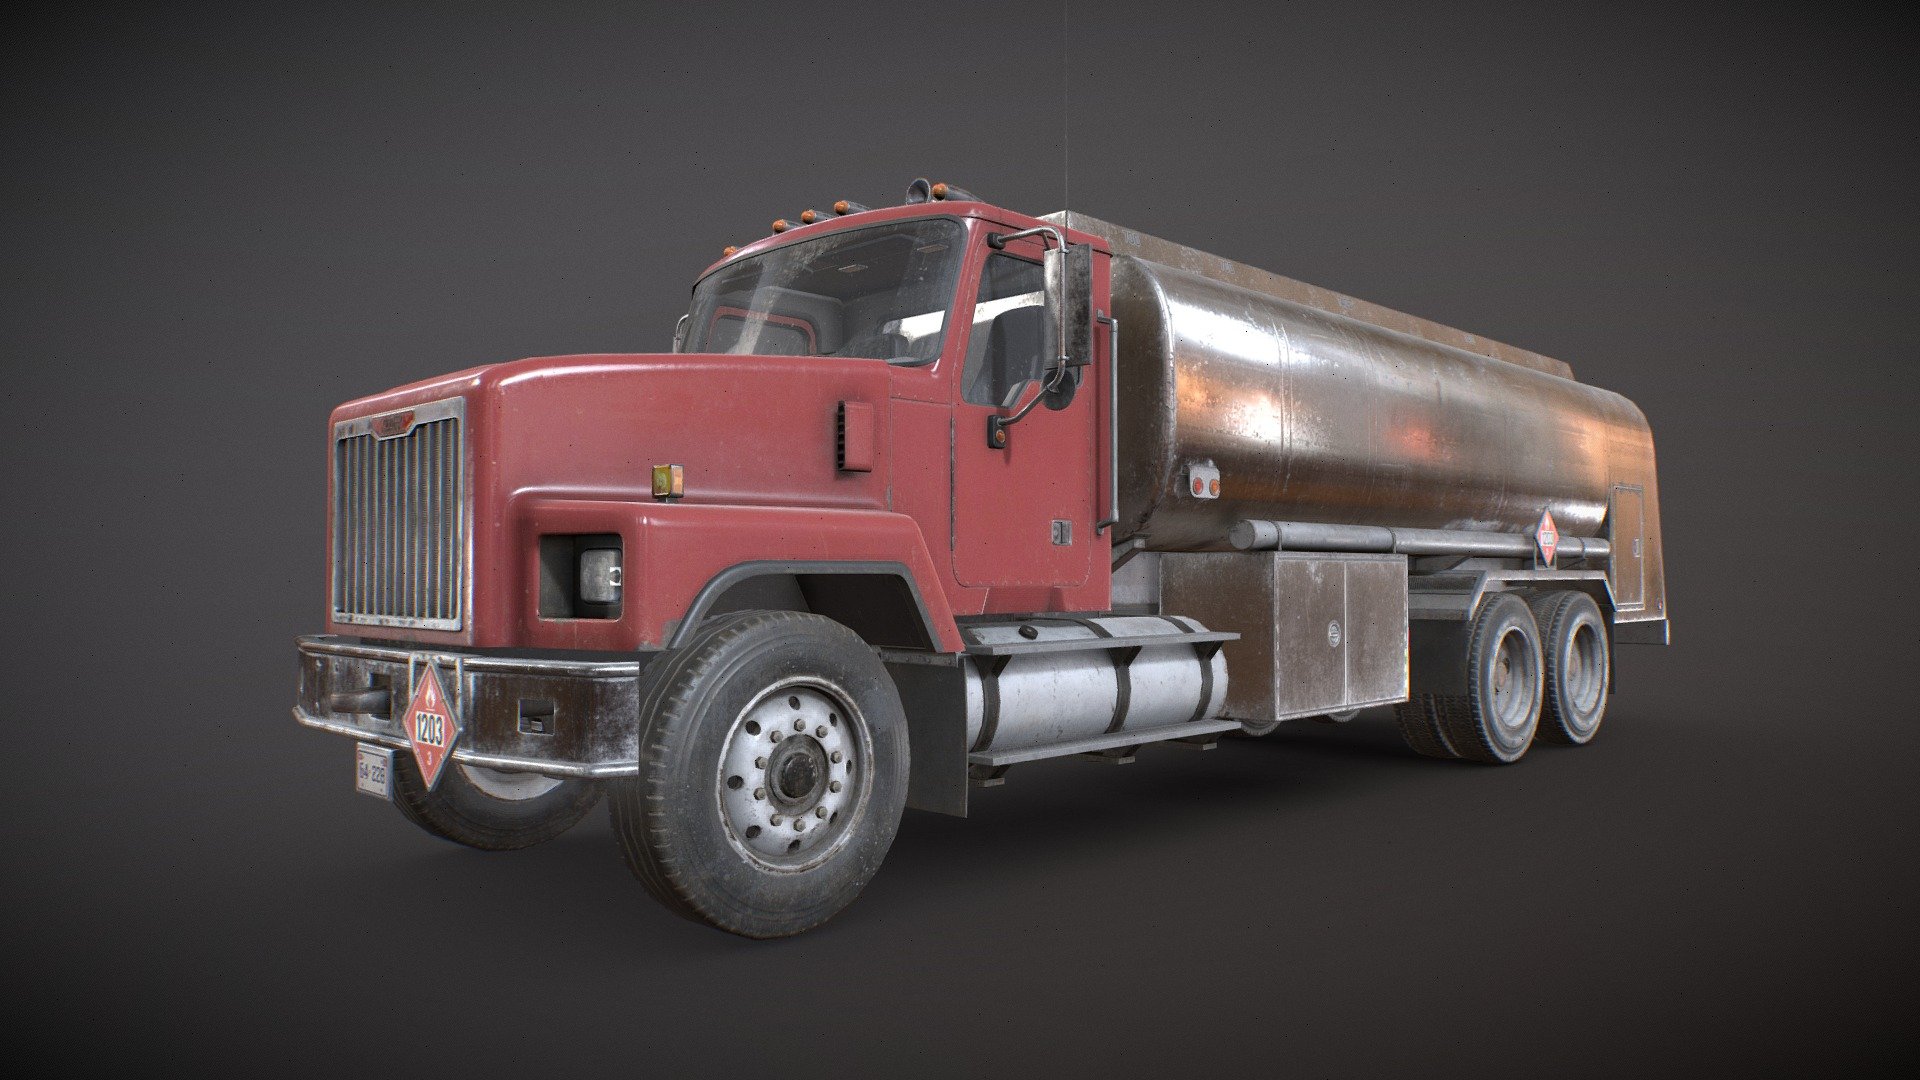 Low Poly generic Classic Fuel Truck 3D model:




The unit of measurement used for the model is centimeters

Doors, wheels and steering wheel are separated and can be easily rigged/animated (model not animated).

Interior is a separate object to detach if needed.

PBR textures made in Substance Painter

All branding and labels are custom made.

Model also compatible with other &ldquo;Classic Truck